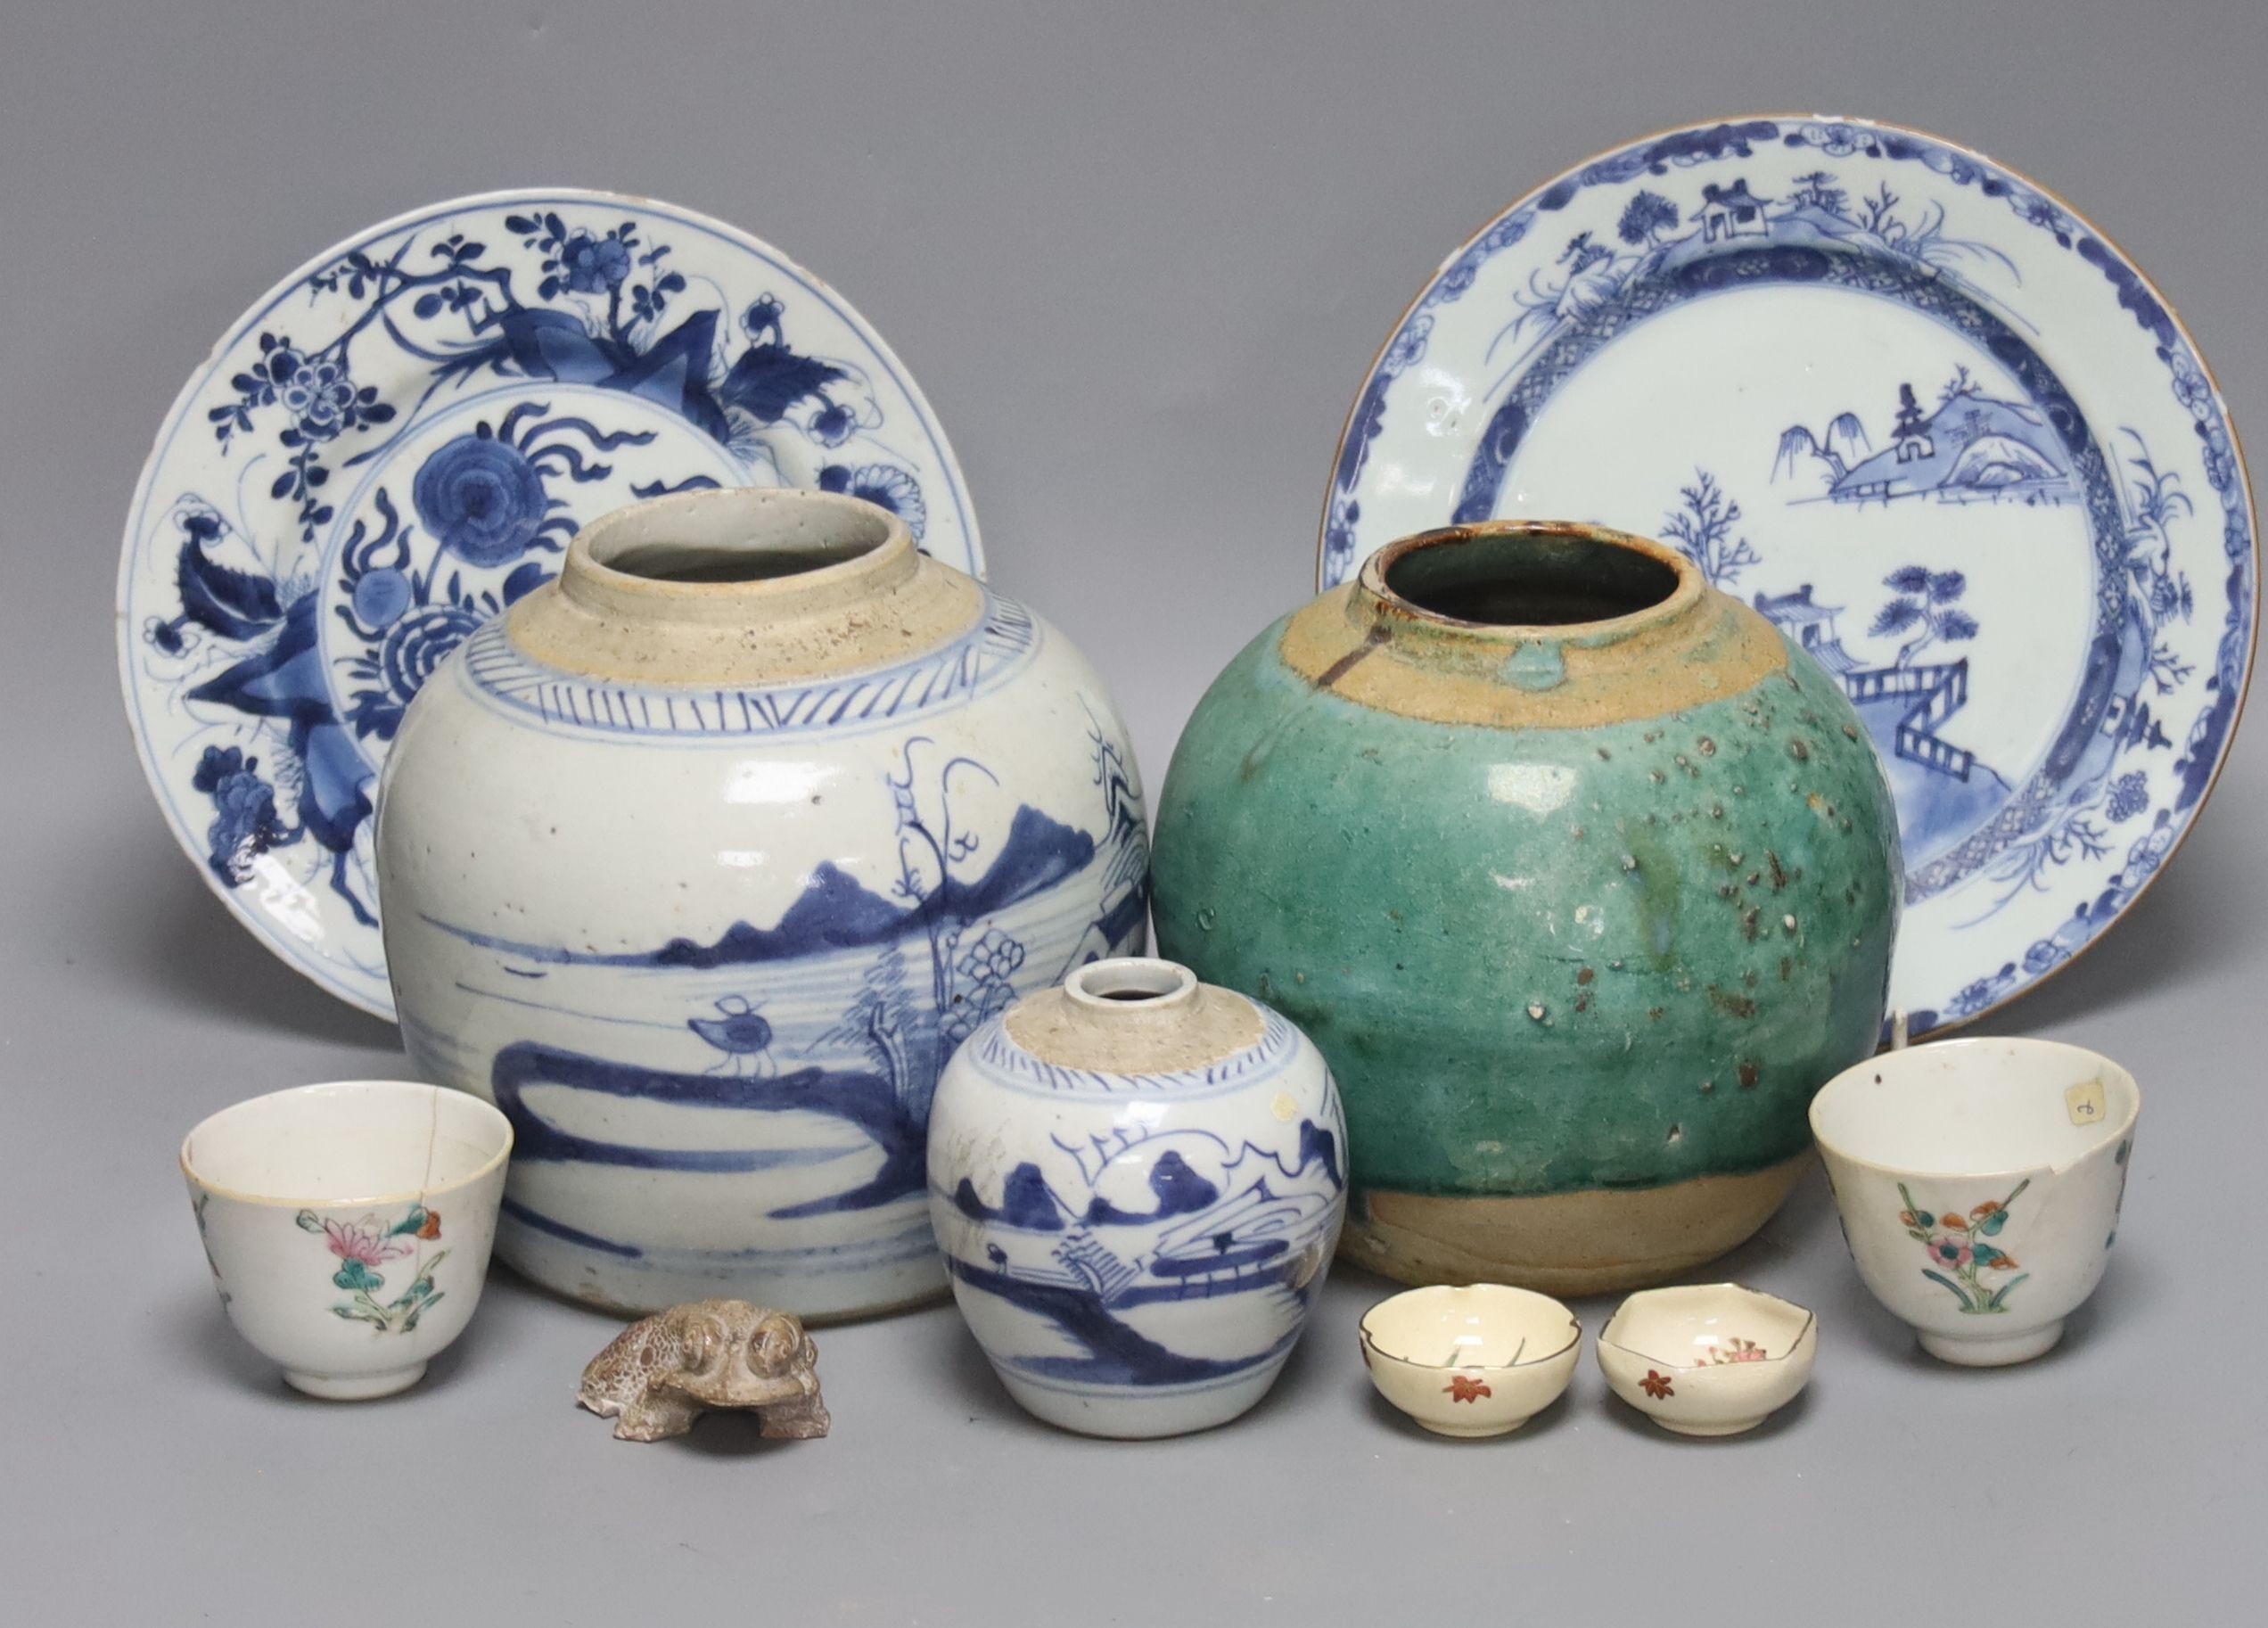 A Chinese blue and white porcelain jar, a similar smaller jar and sundry items